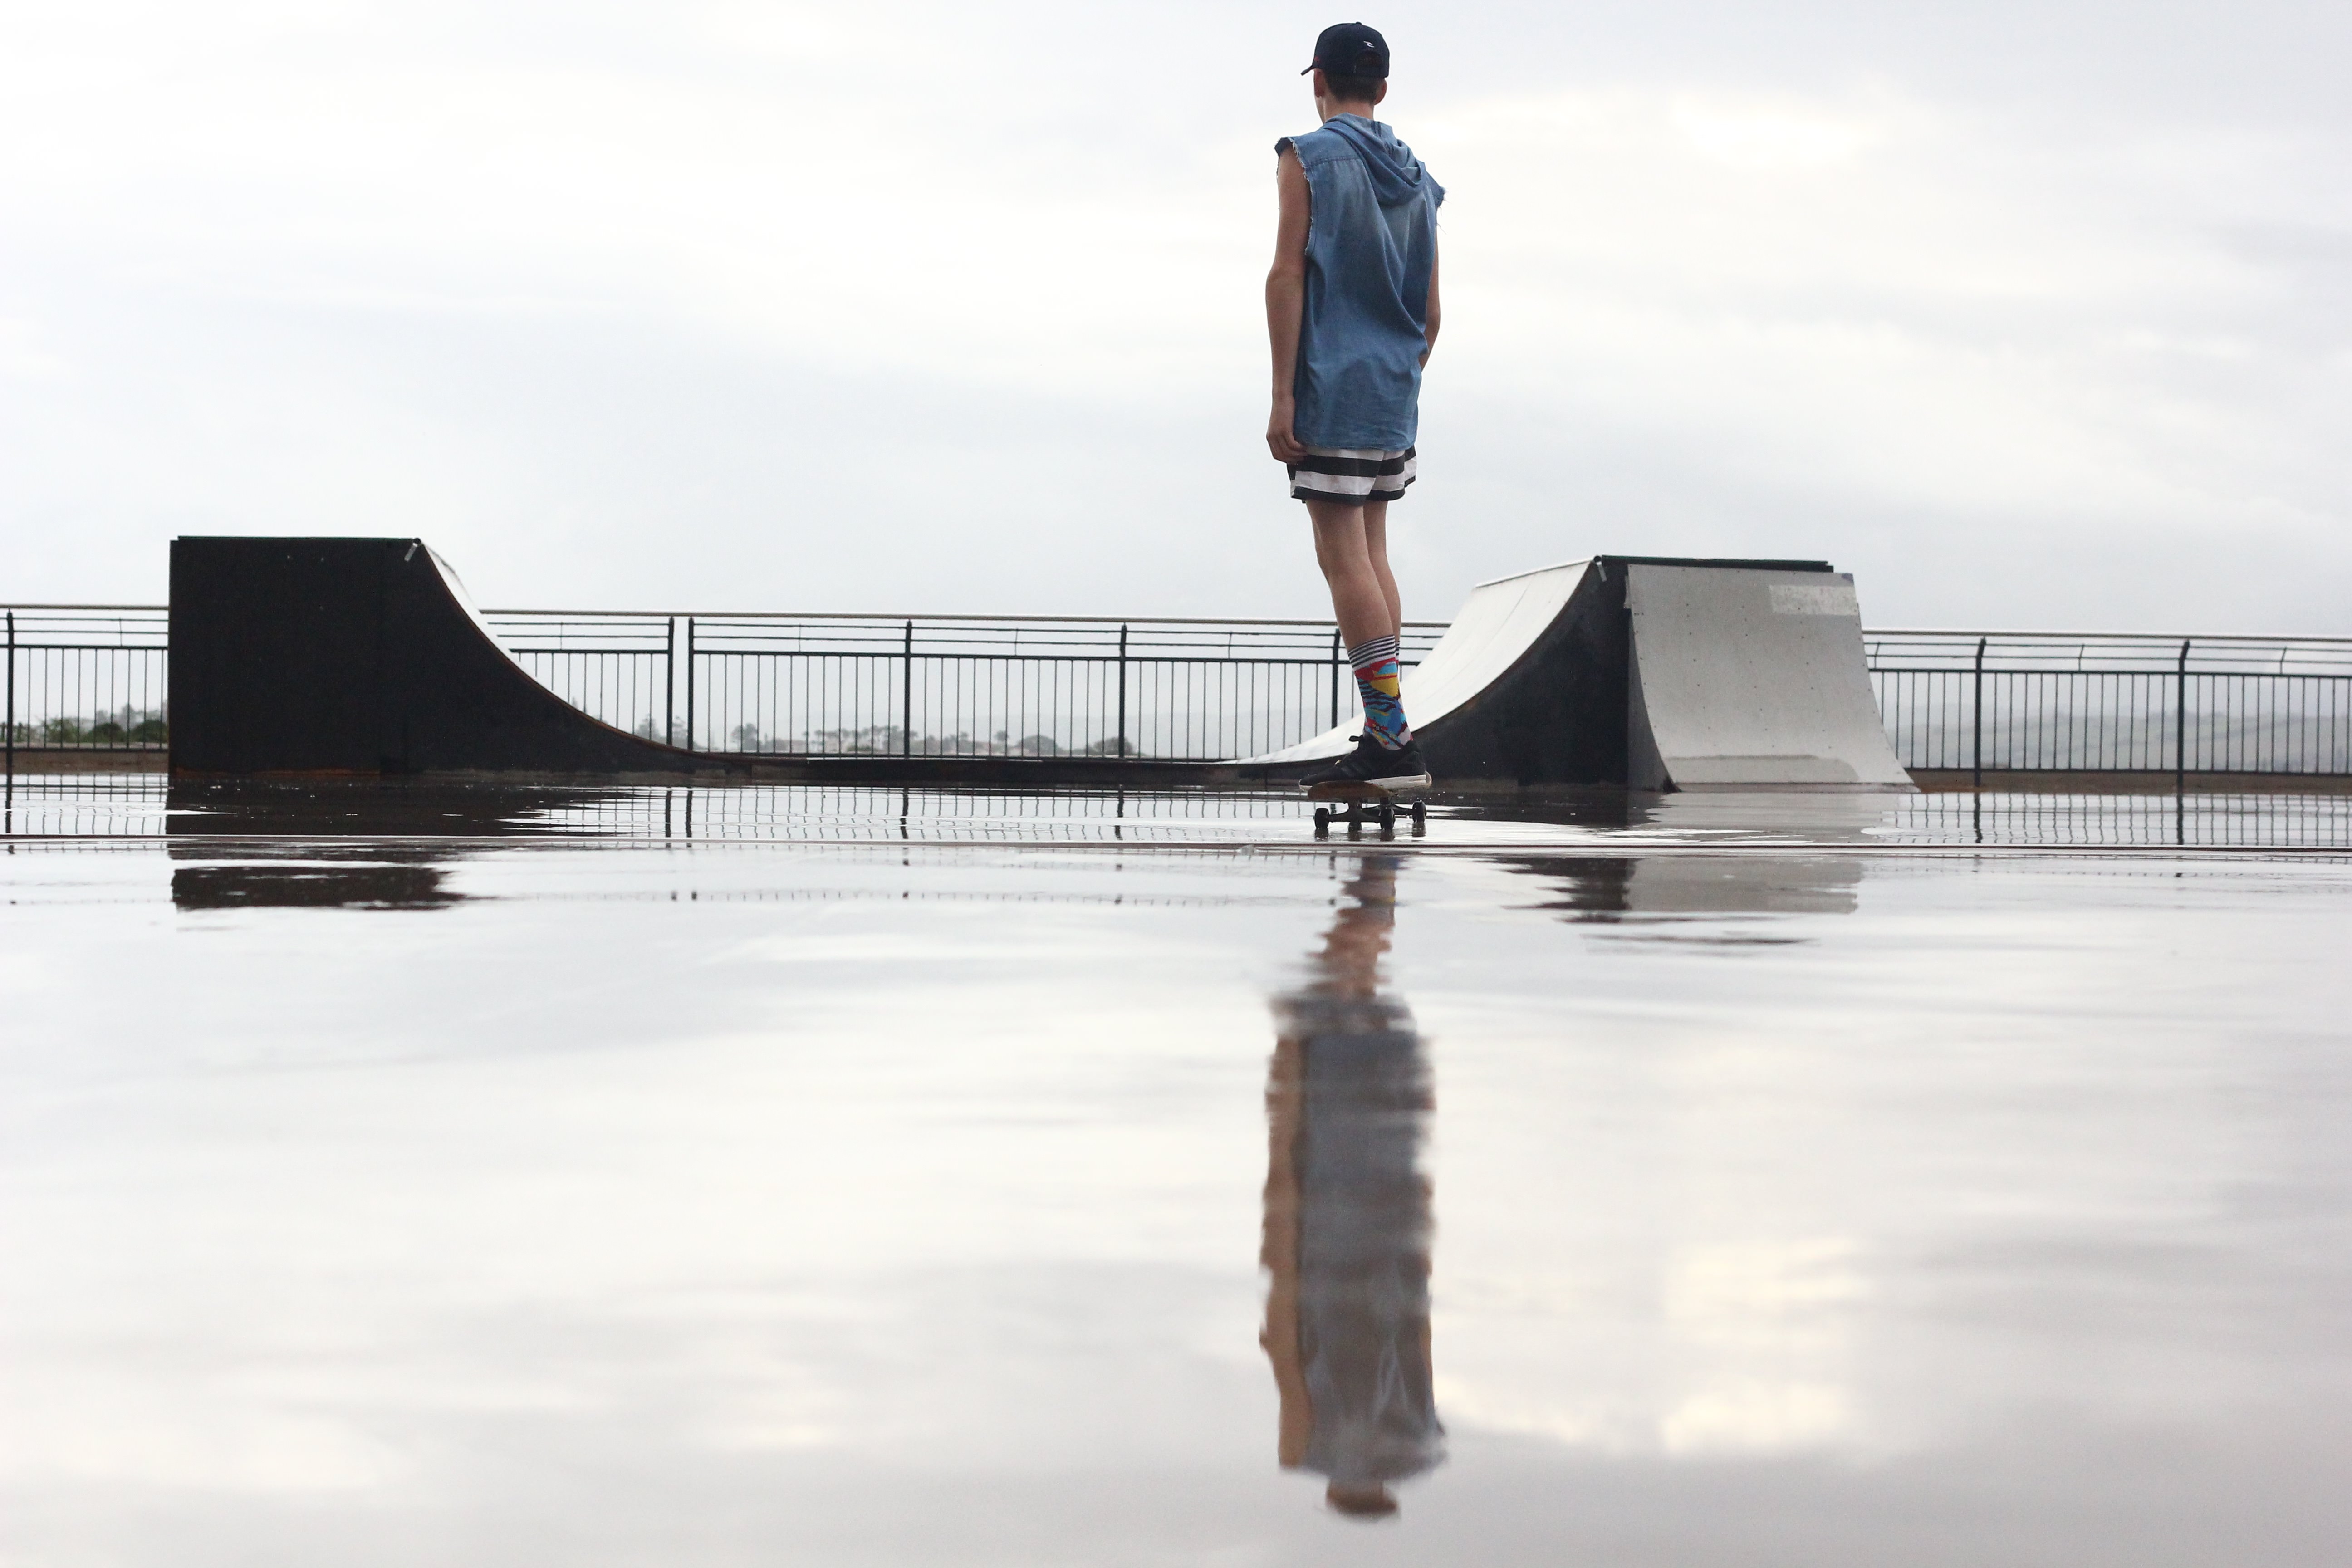 Boy standing adjacent to skateboard ramp, wet pavement, looking into distance